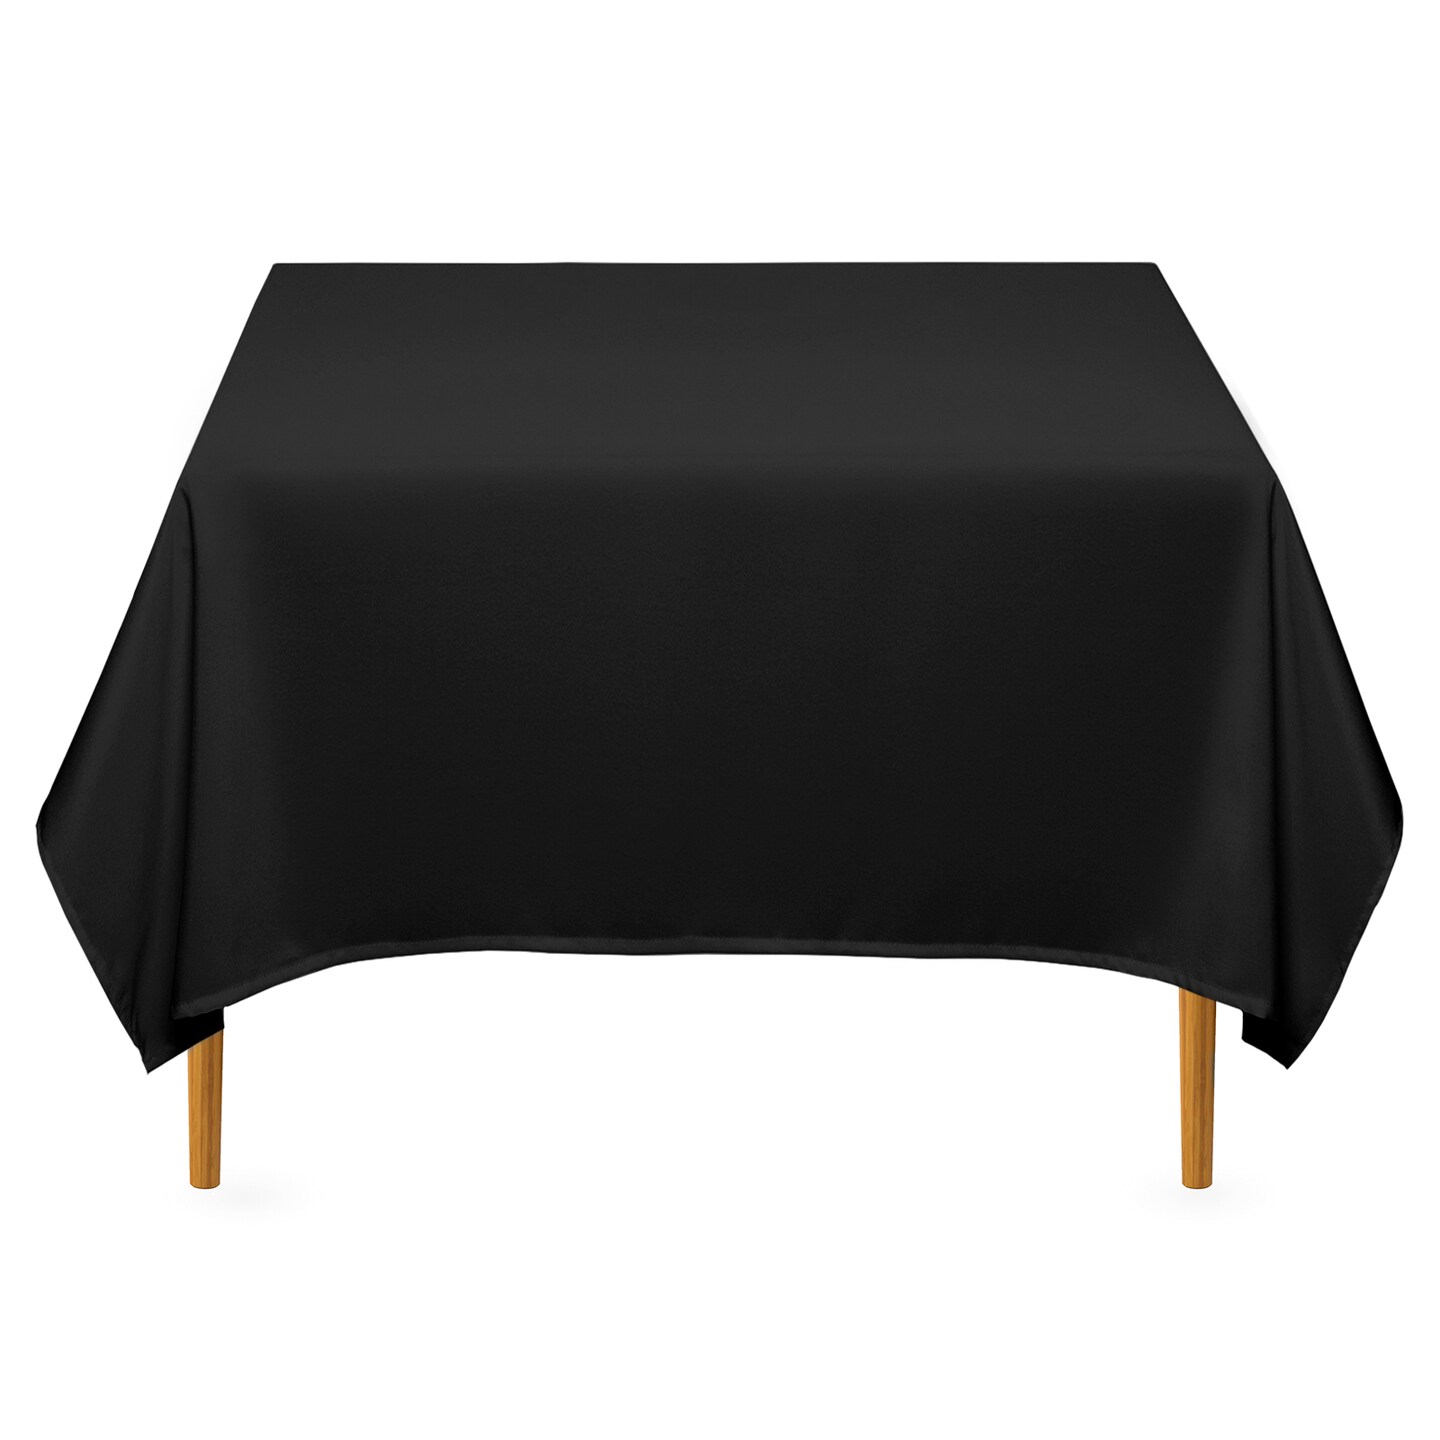 Lann&#x27;s Linens - 10 Premium Square Tablecloths for Wedding / Banquet / Restaurant - Polyester Fabric Table Cloths